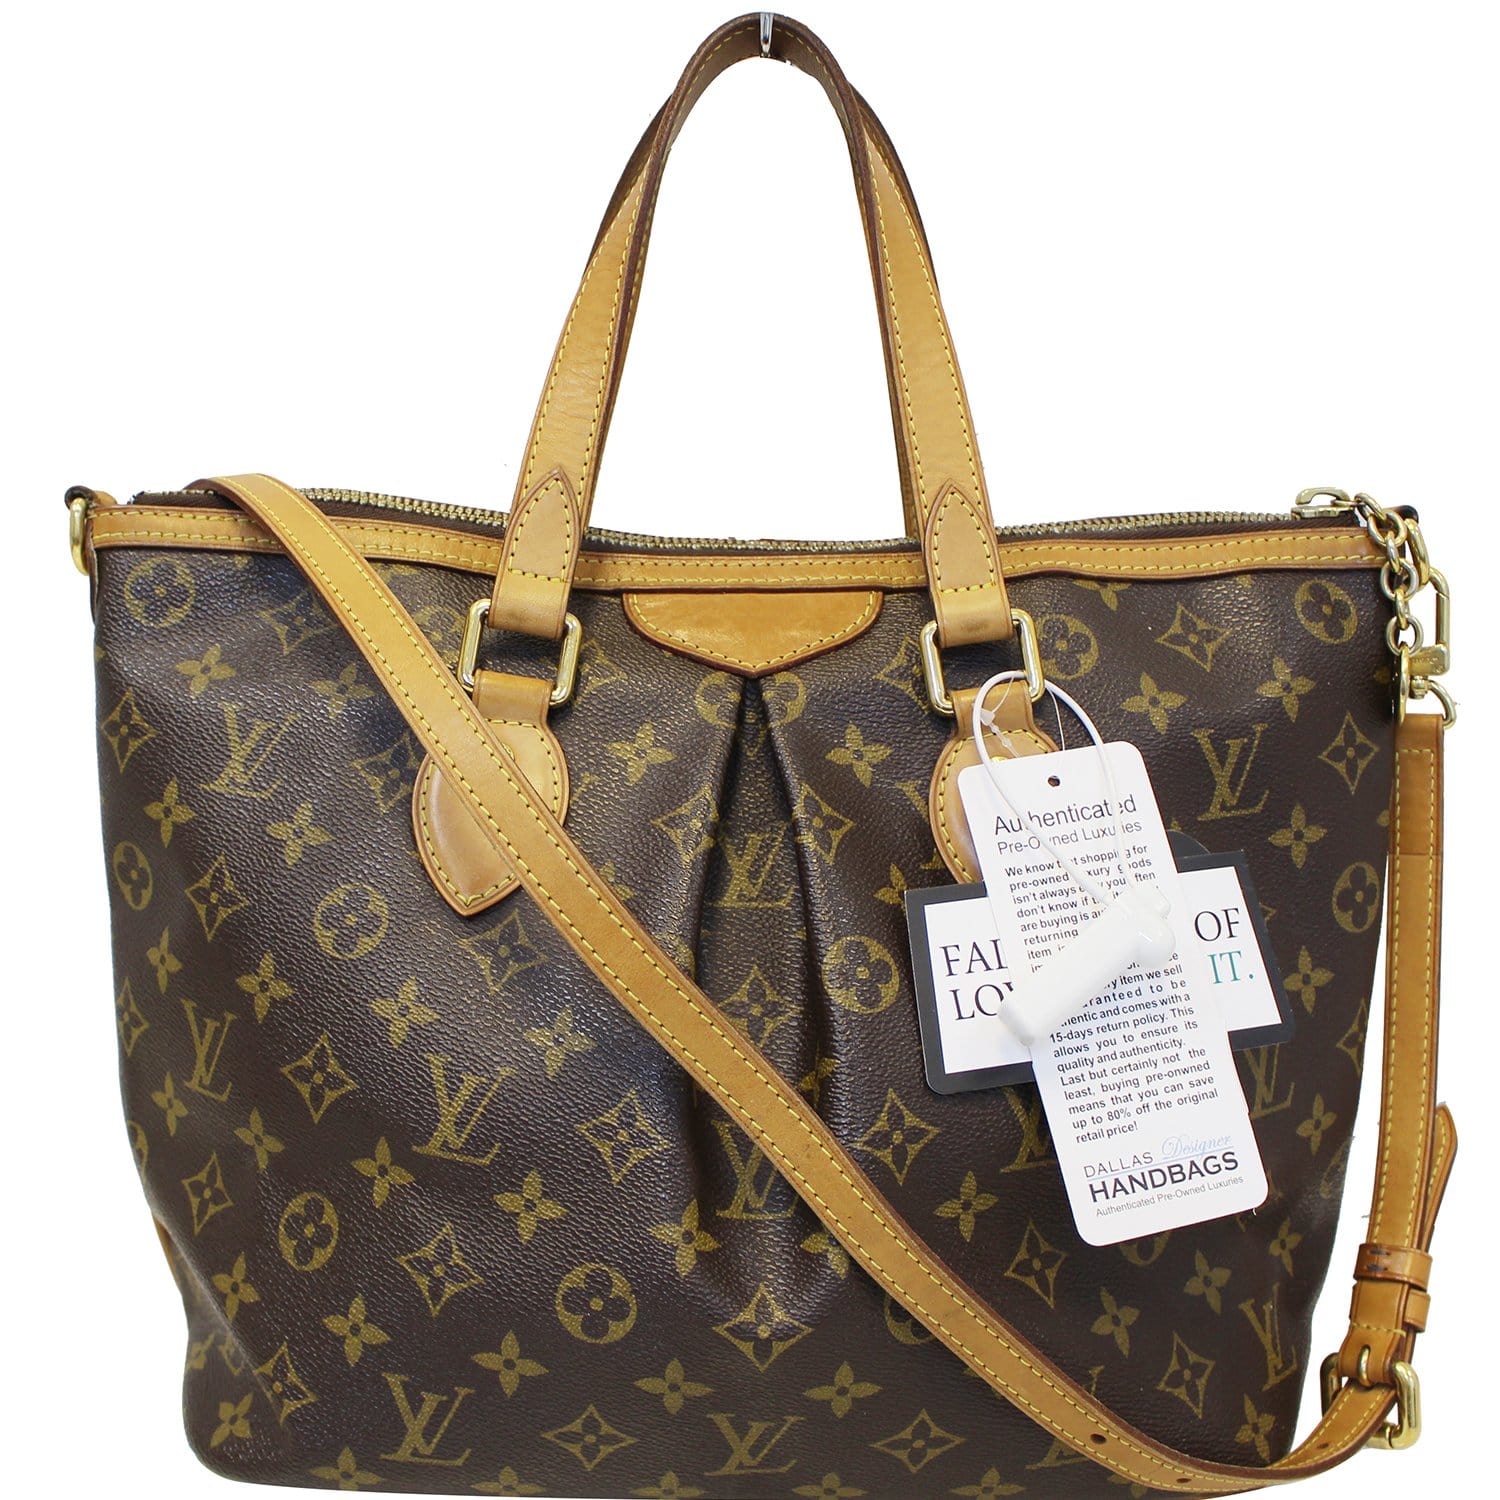 Louis Vuitton - Authenticated  Handbag - Cloth Brown for Women, Very Good Condition